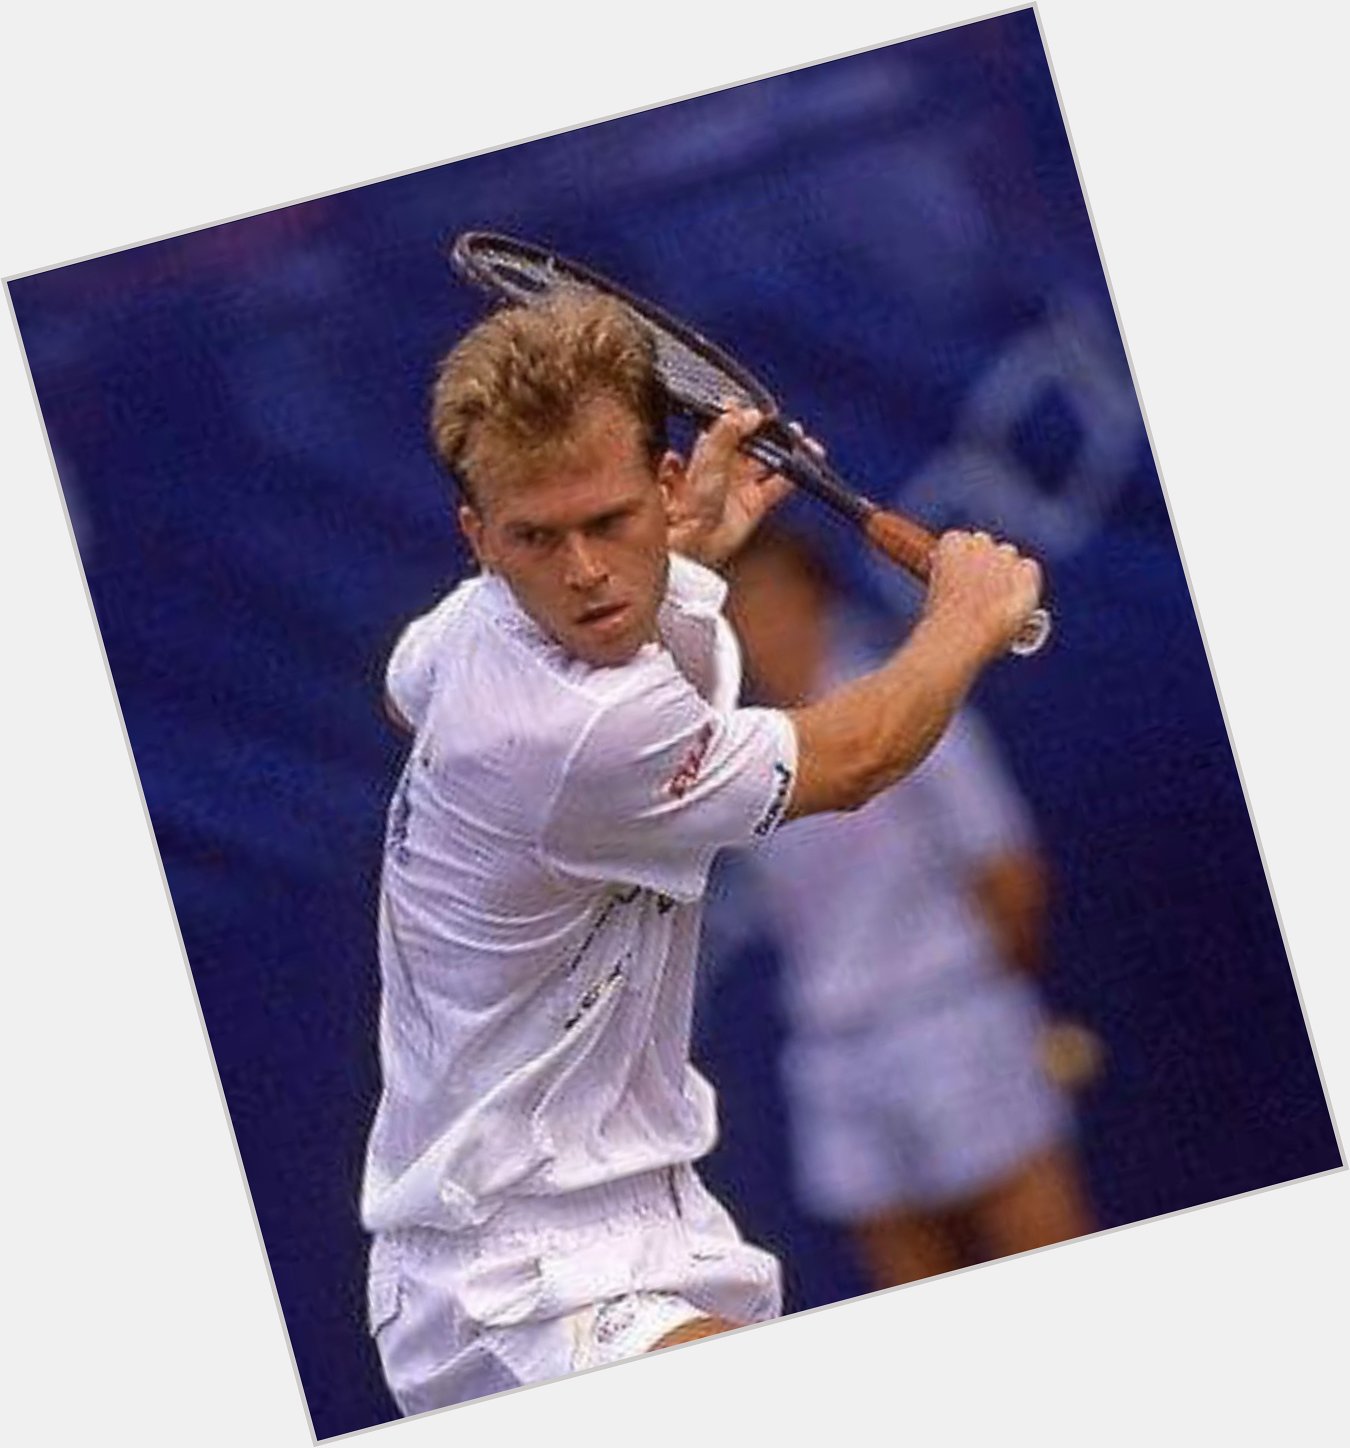 A belated happy birthday to one of the most popular champions in our history, Stefan Edberg. 1985, 1987 